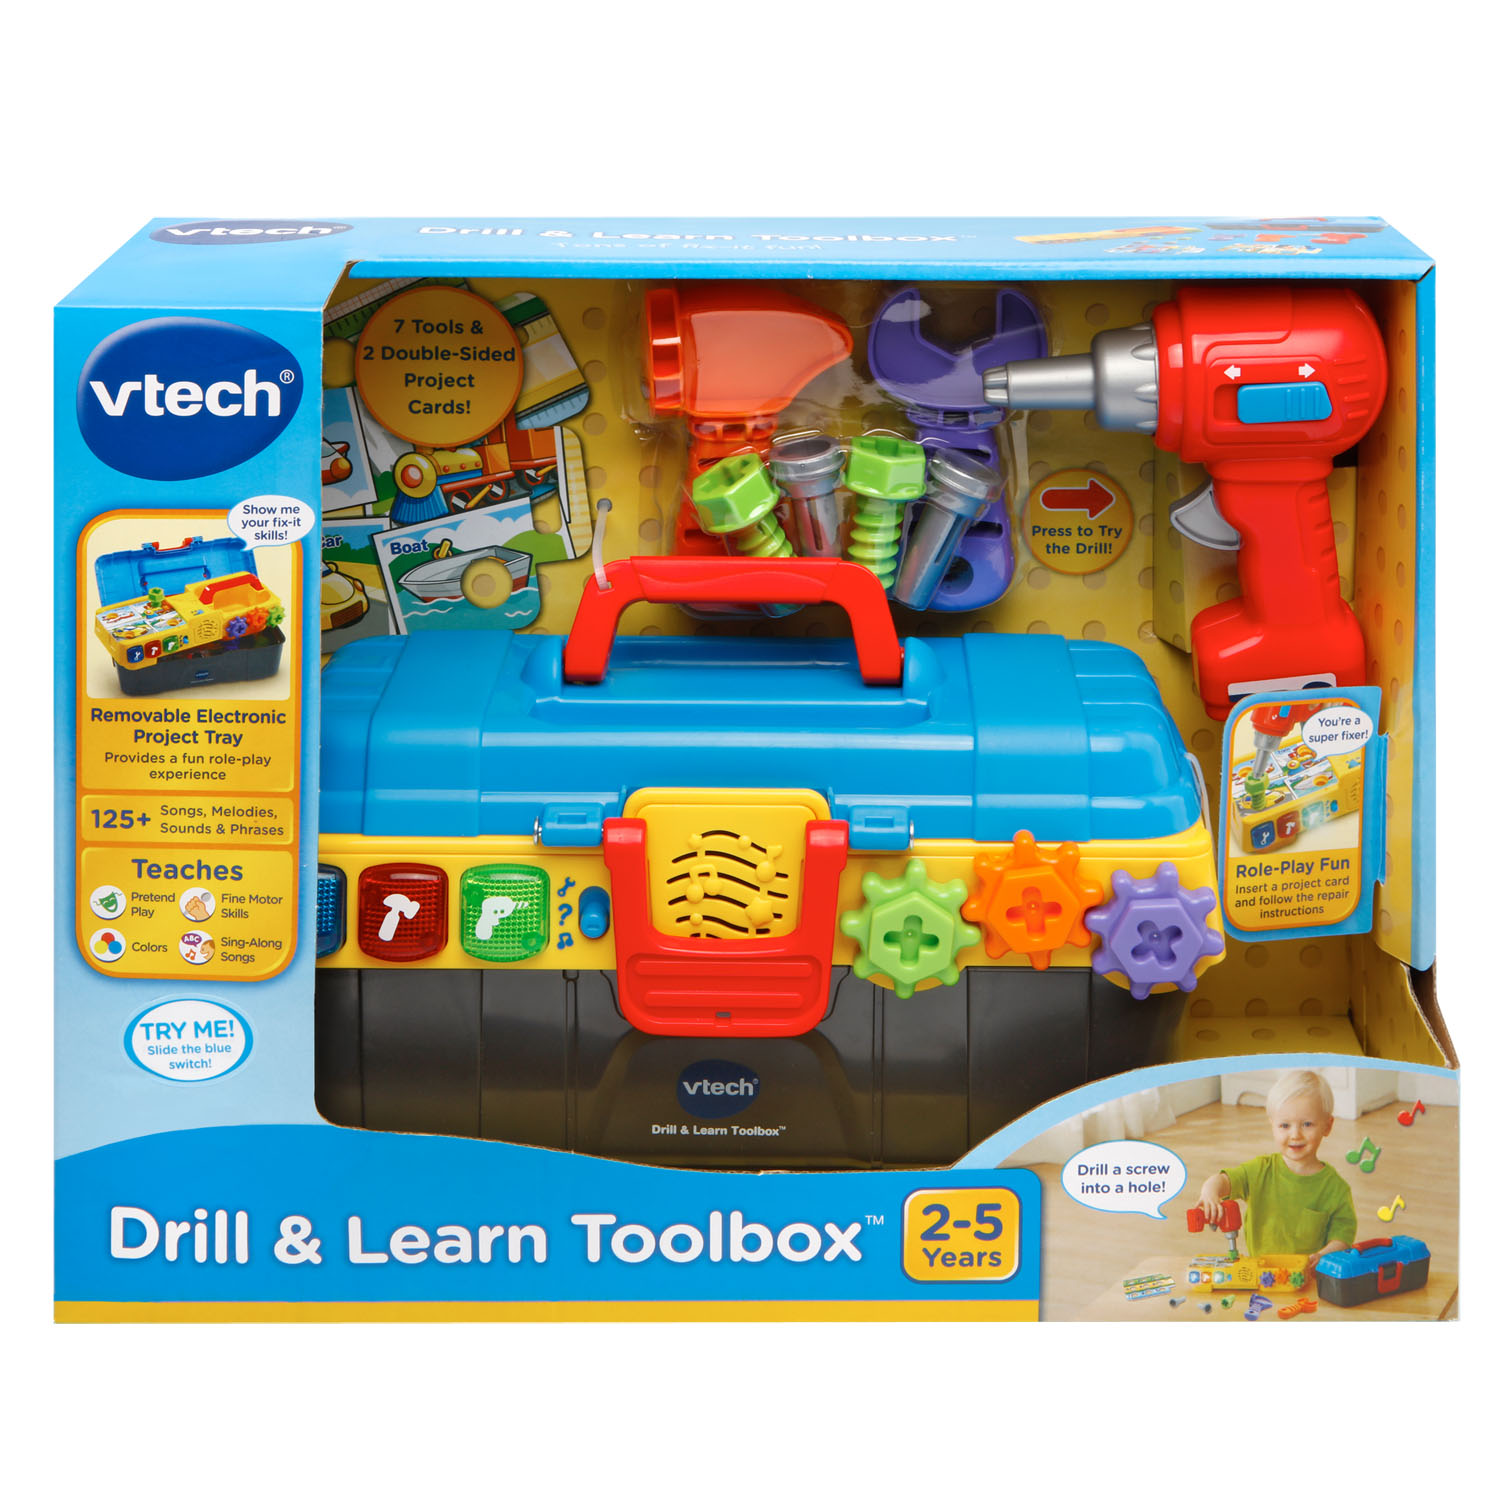 VTech Drill and Learn Toolbox With Working Drill and Tools - image 5 of 5